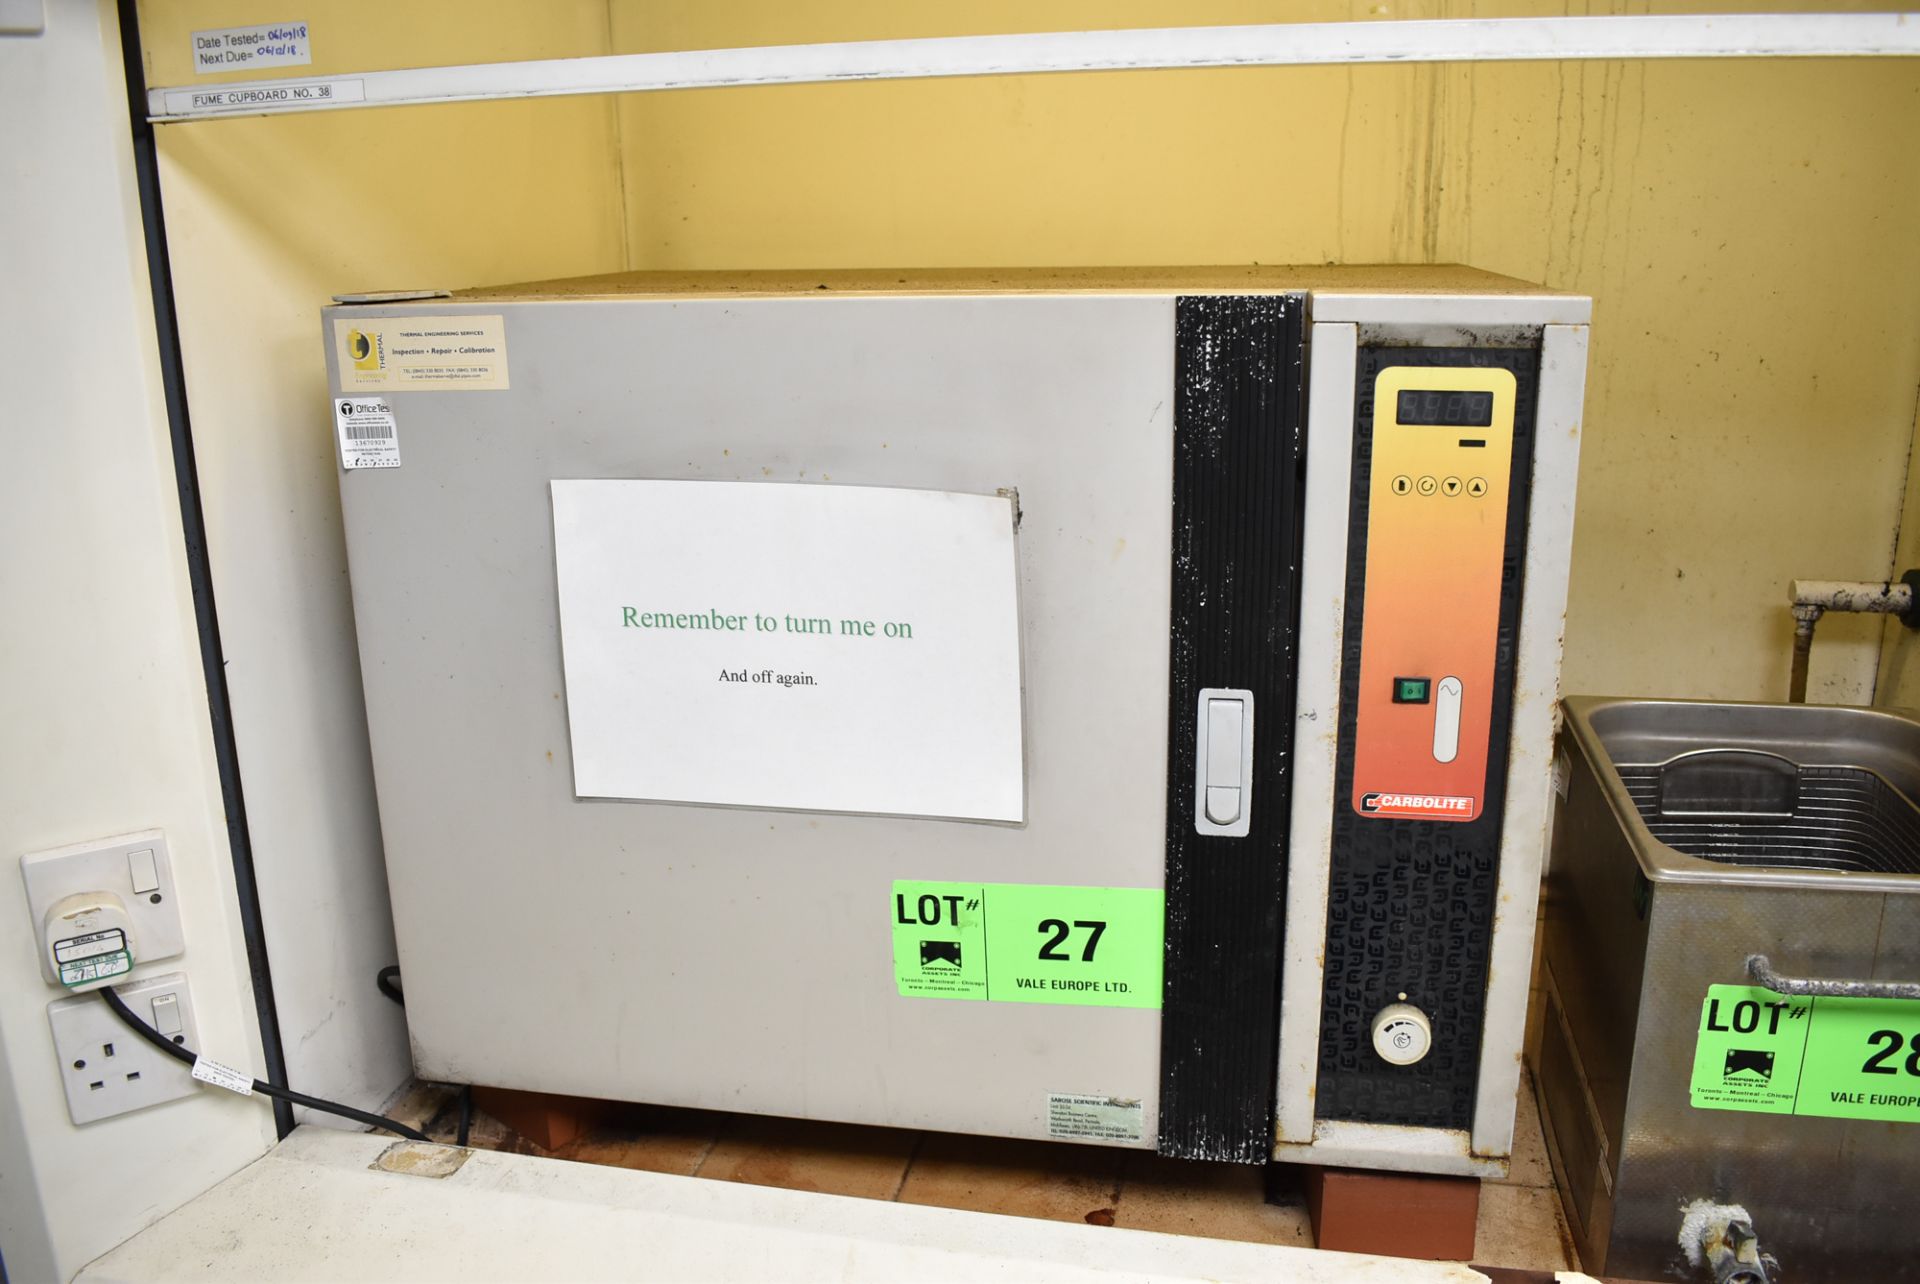 CARBOLITE DIGITAL SAMPLE DRYING OVEN (ROOM 264D) [RIGGING FEES FOR LOT #27 - £50 PLUS APPLICABLE